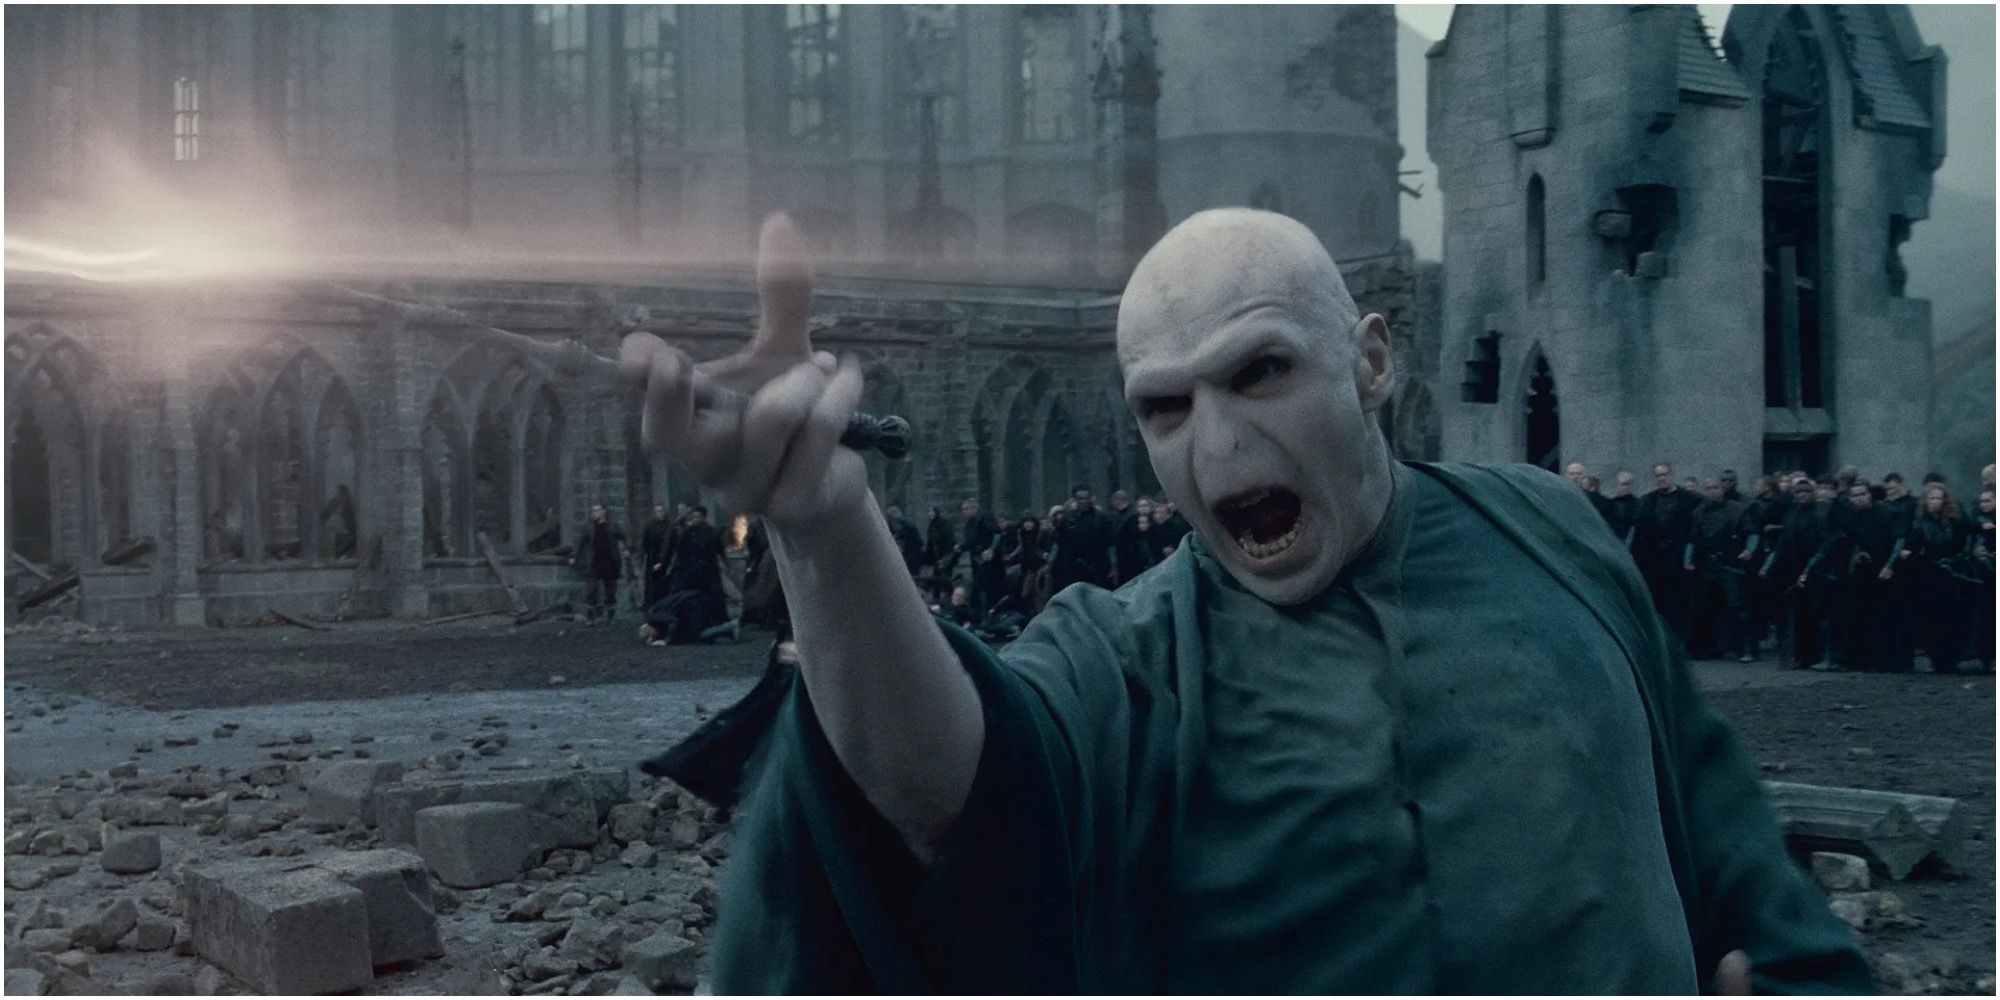 Lord Voldemort In Harry Potter and The Deathly Hallows